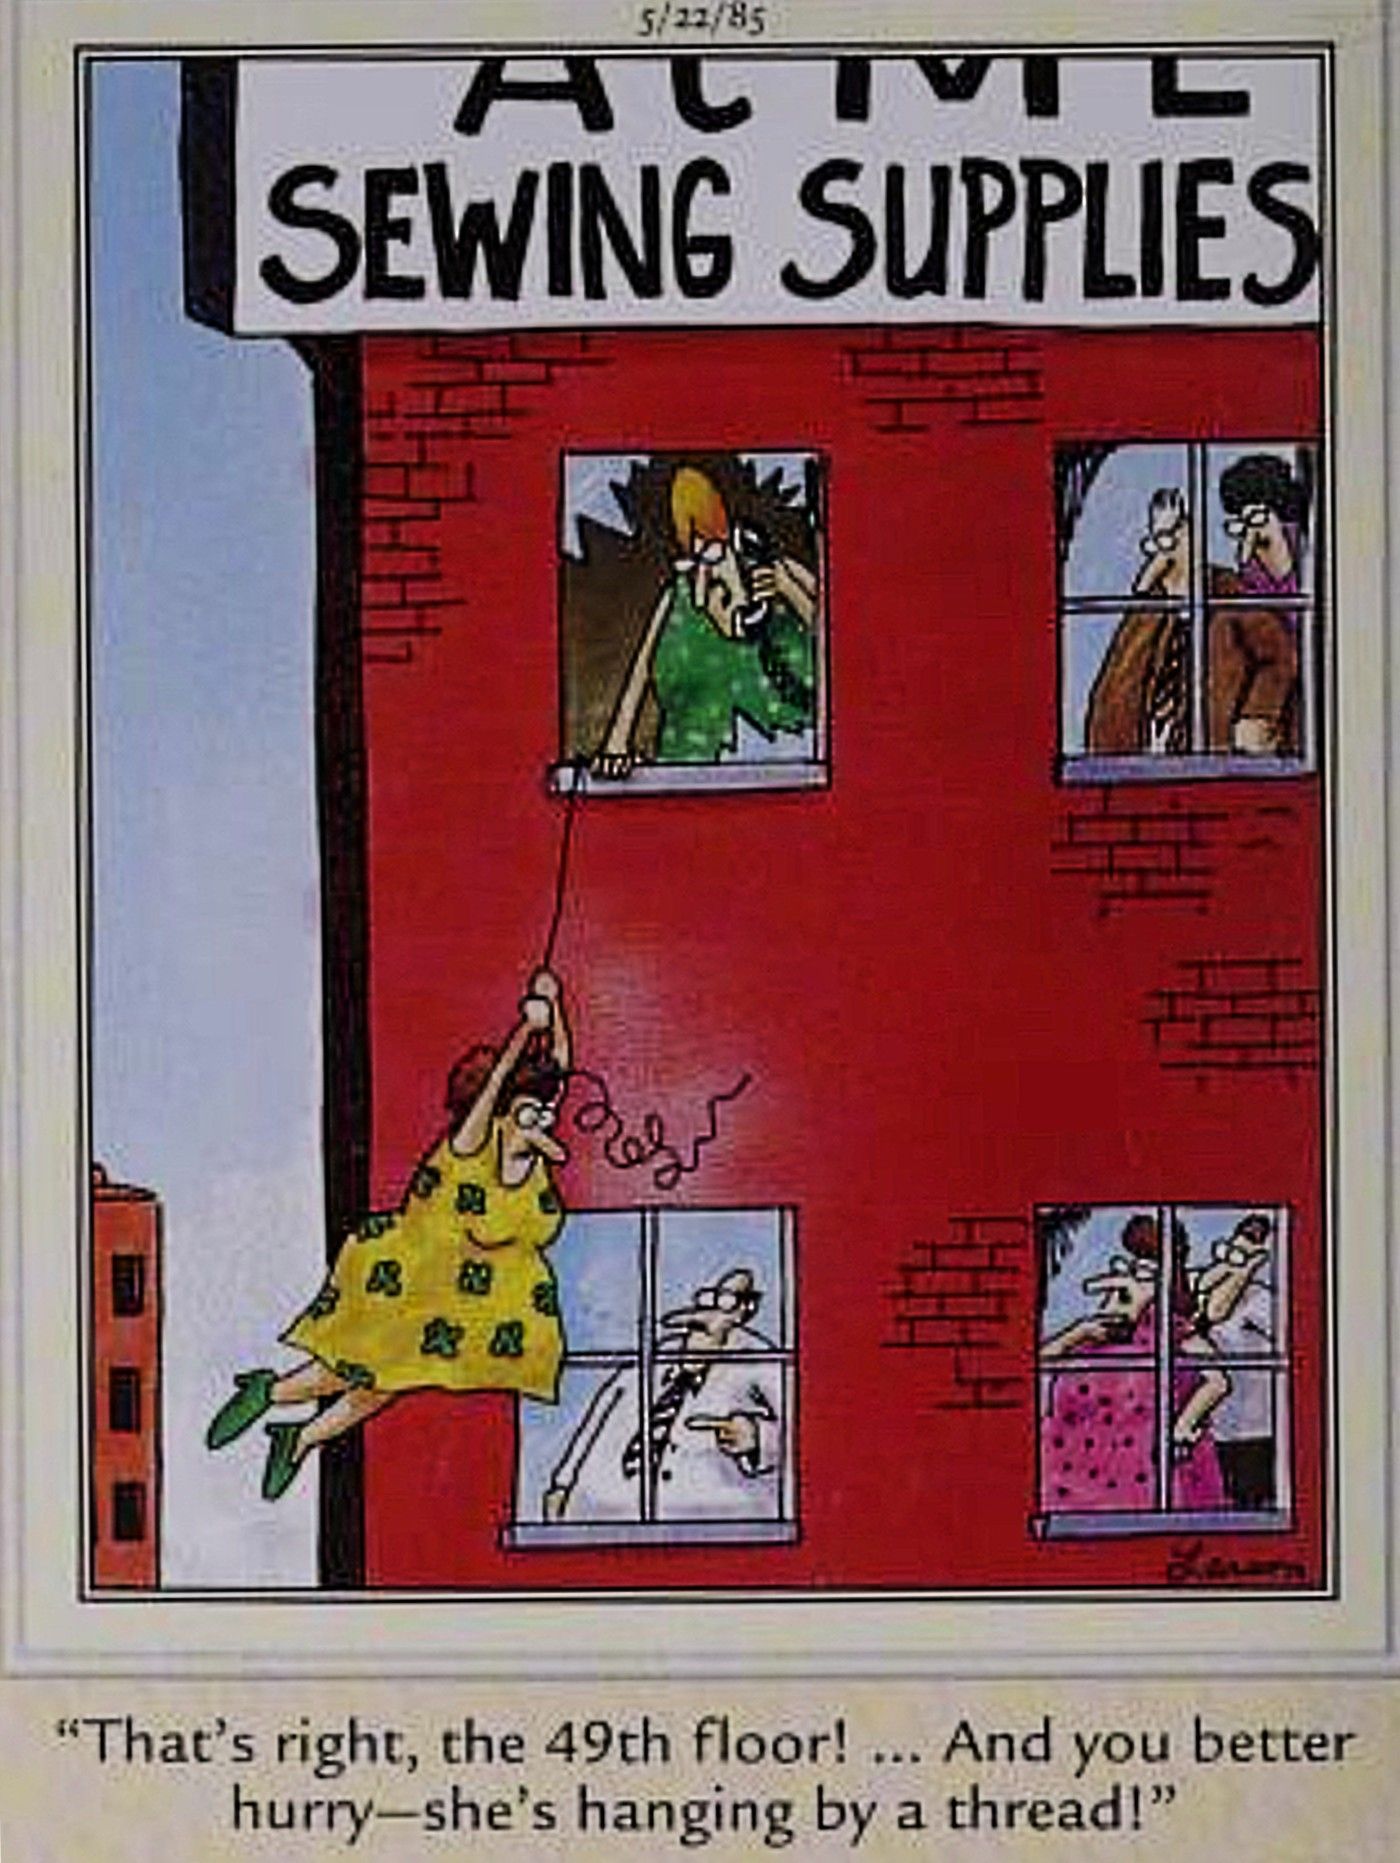 Far Side, woman hanging from a thread from window of Acme Sewing Company